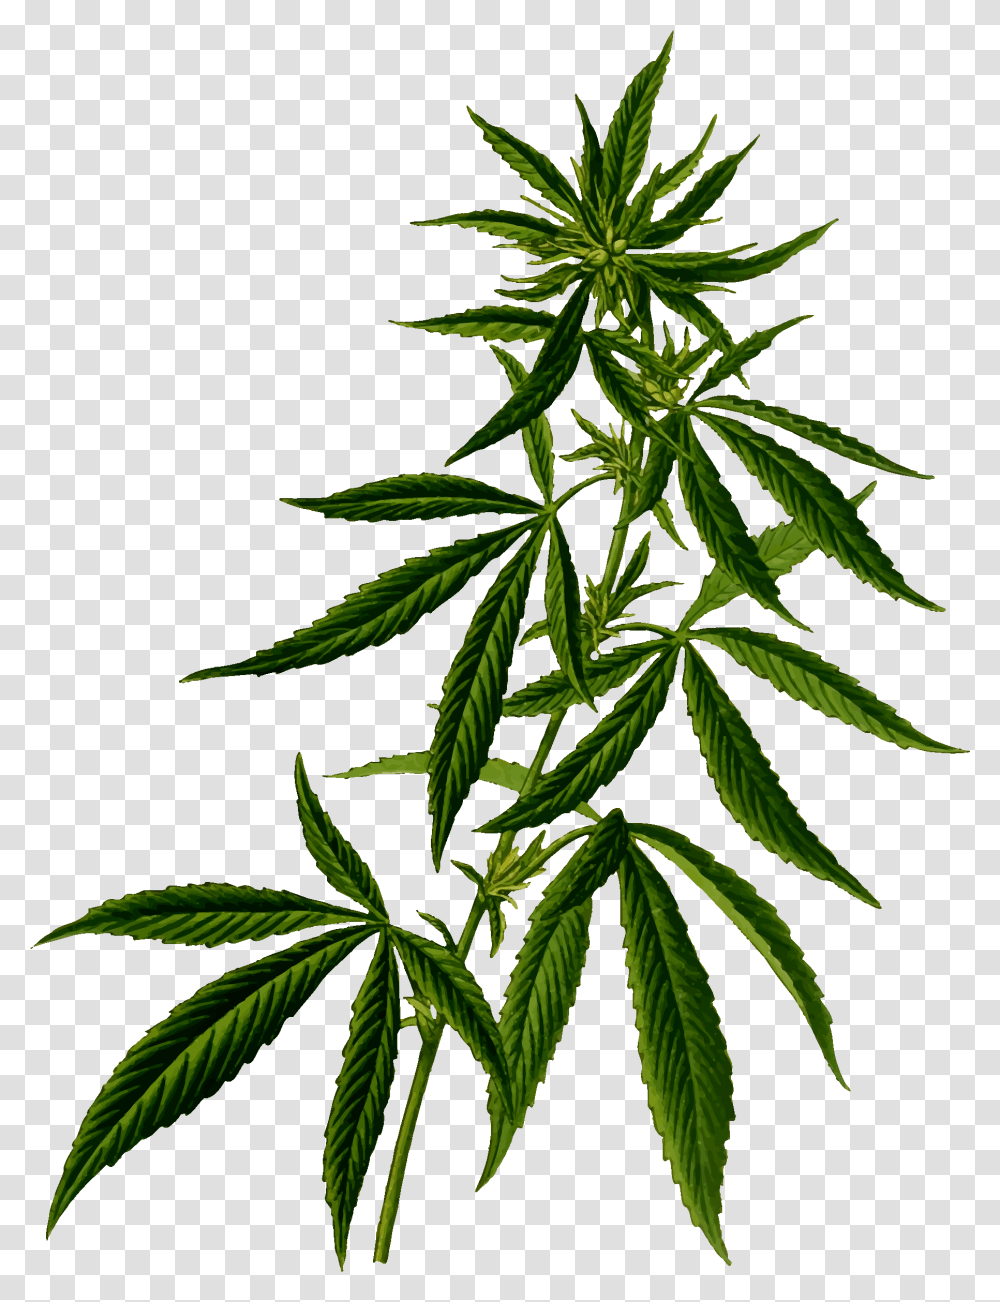 Cannabis Images Free Download Weed, Plant, Hemp Transparent Png